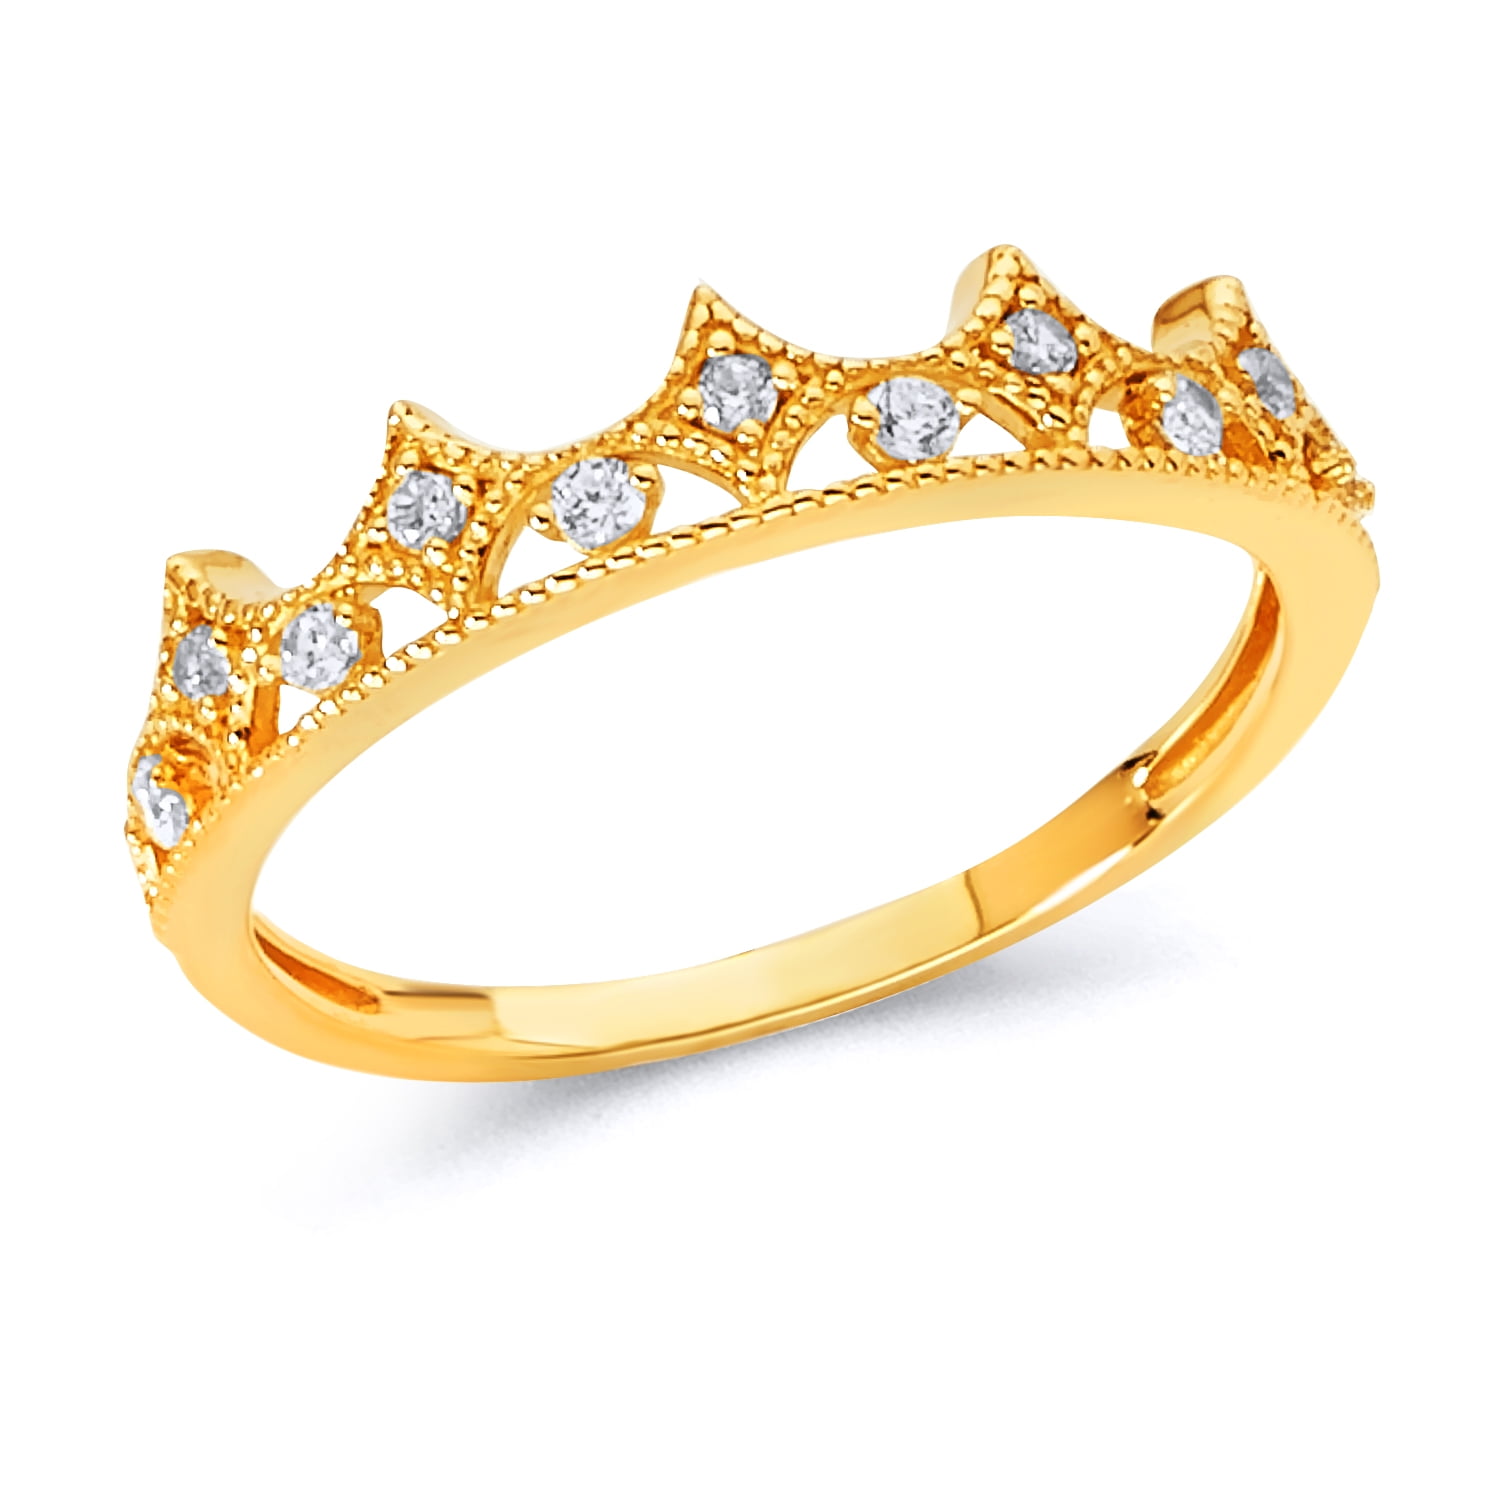 Wellingsale Ladies Solid 14k Yellow Gold Polished CZ Cubic Zirconia Right Hand Ring Band